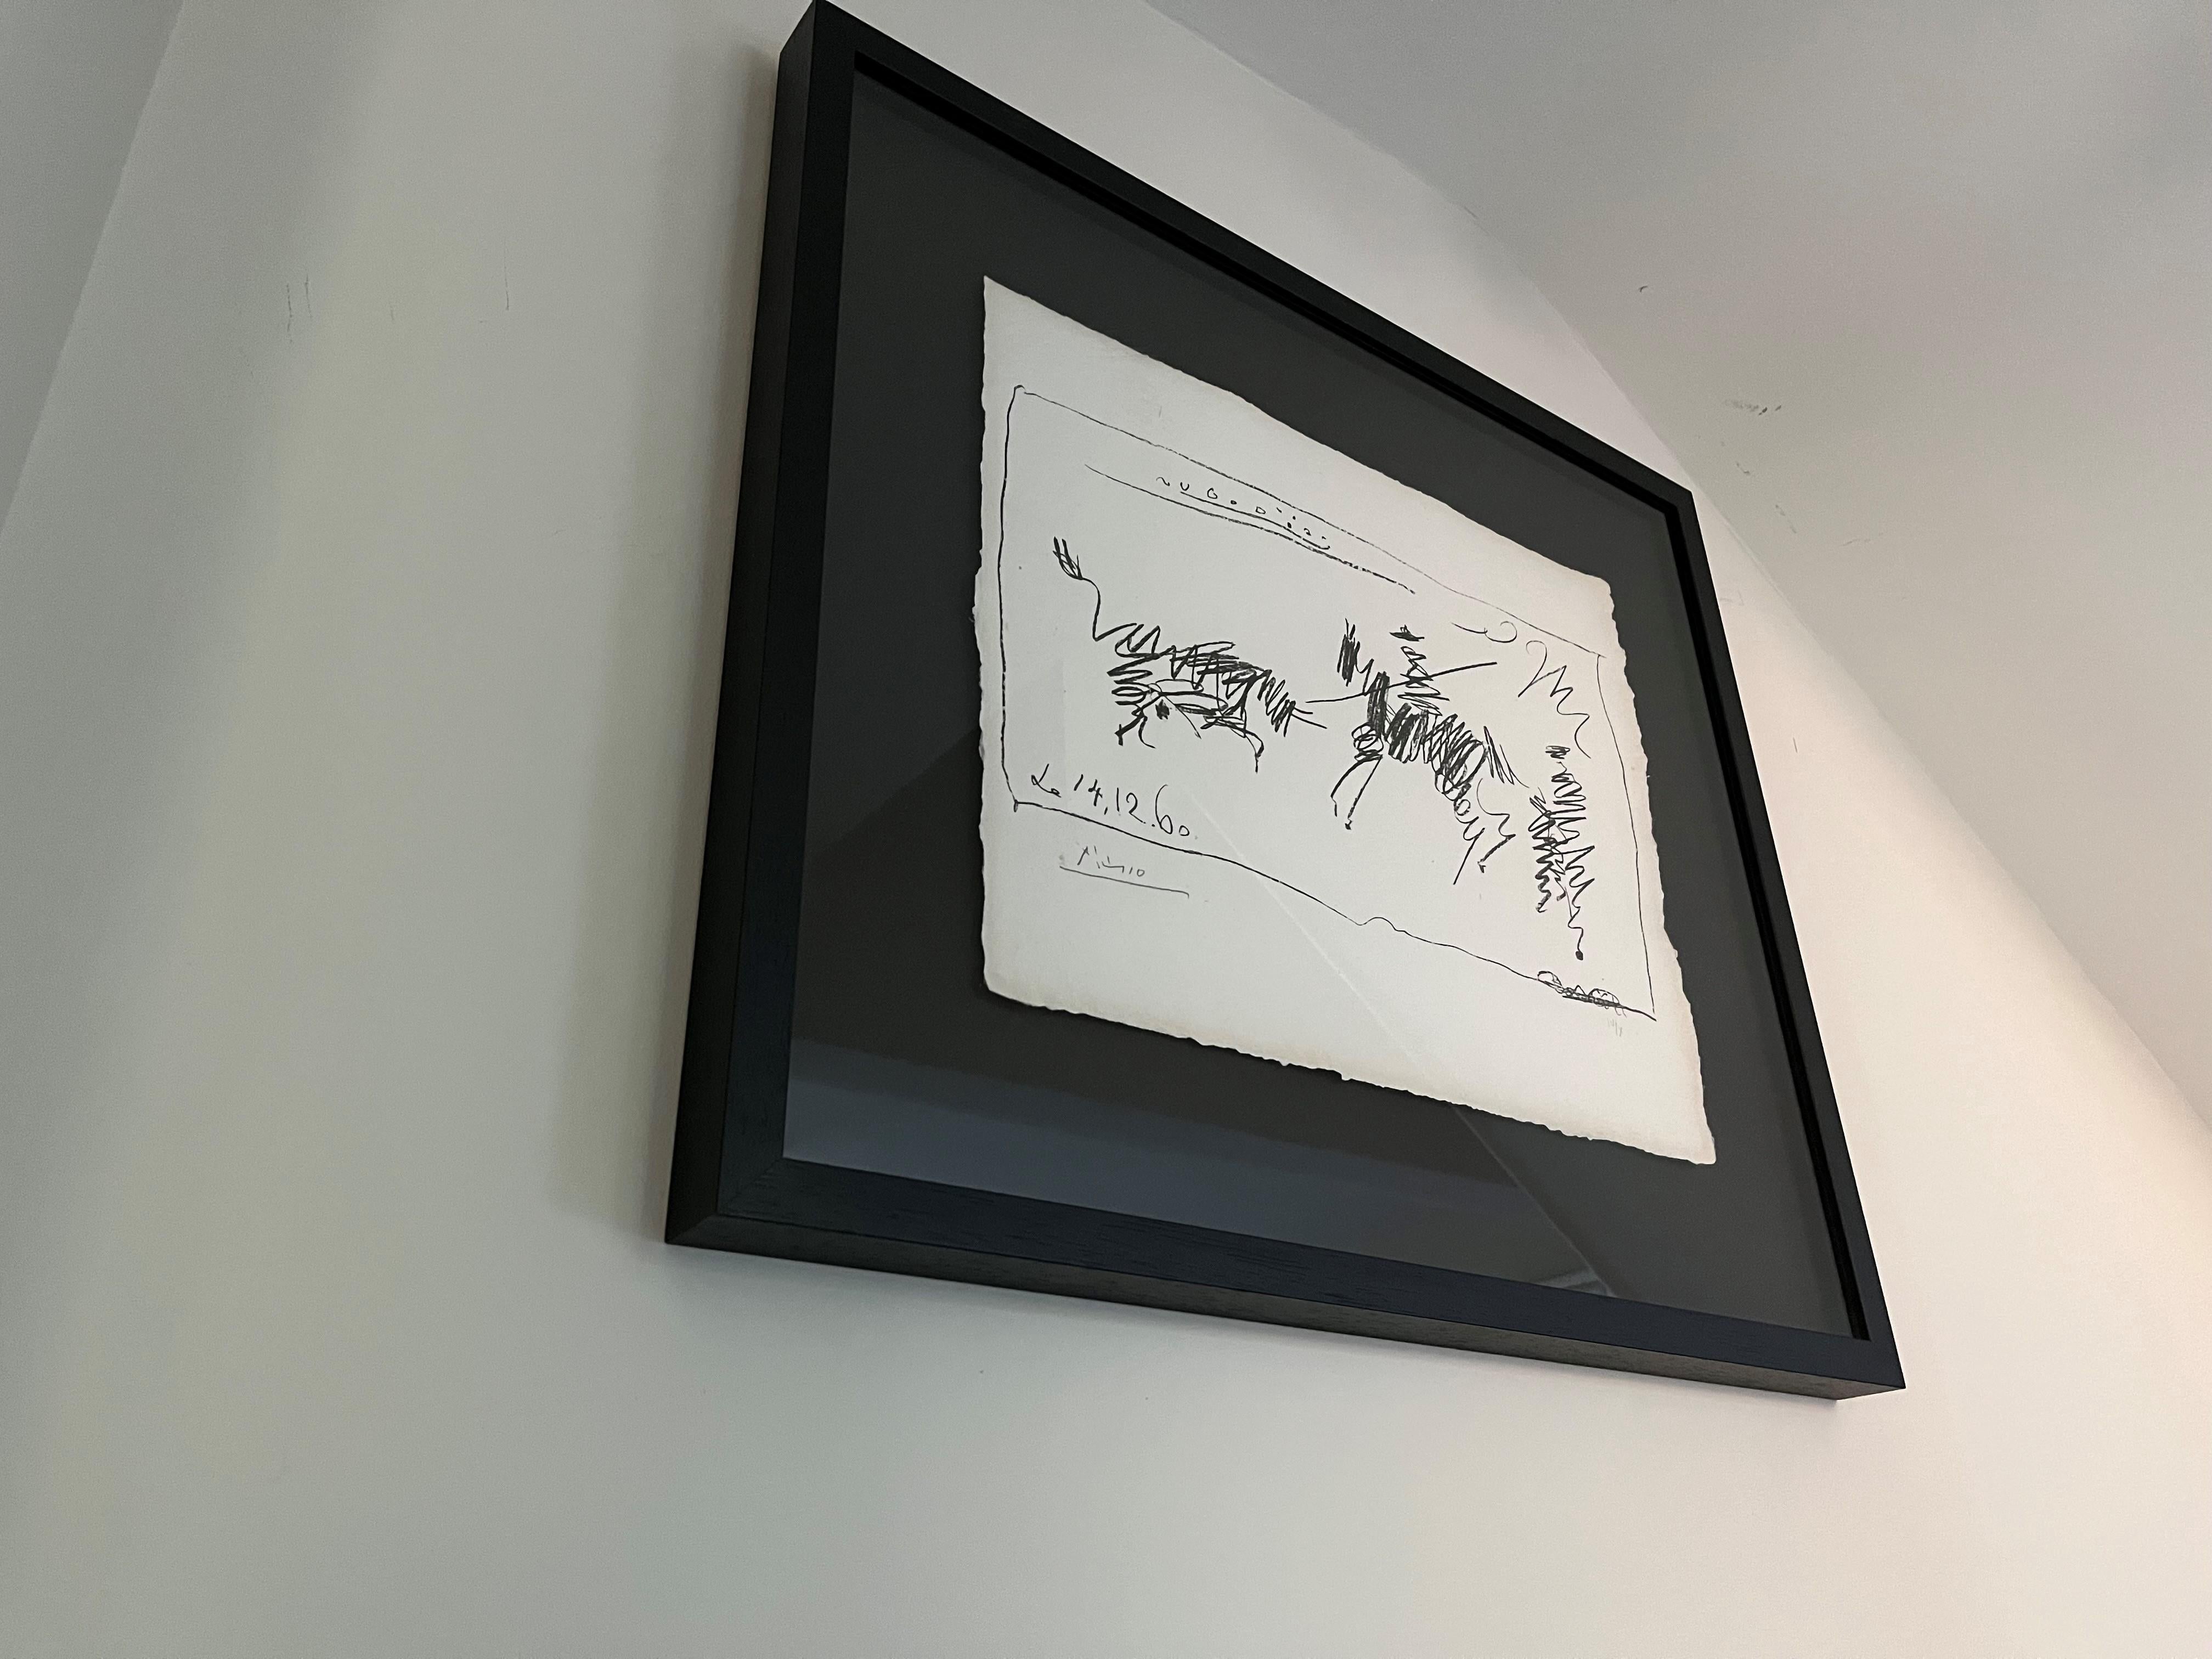 Toros (La Pique), 1960, Pablo Picasso, Lithograph, Bull fighter, Spanish, Signed - Print by (after) Pablo Picasso